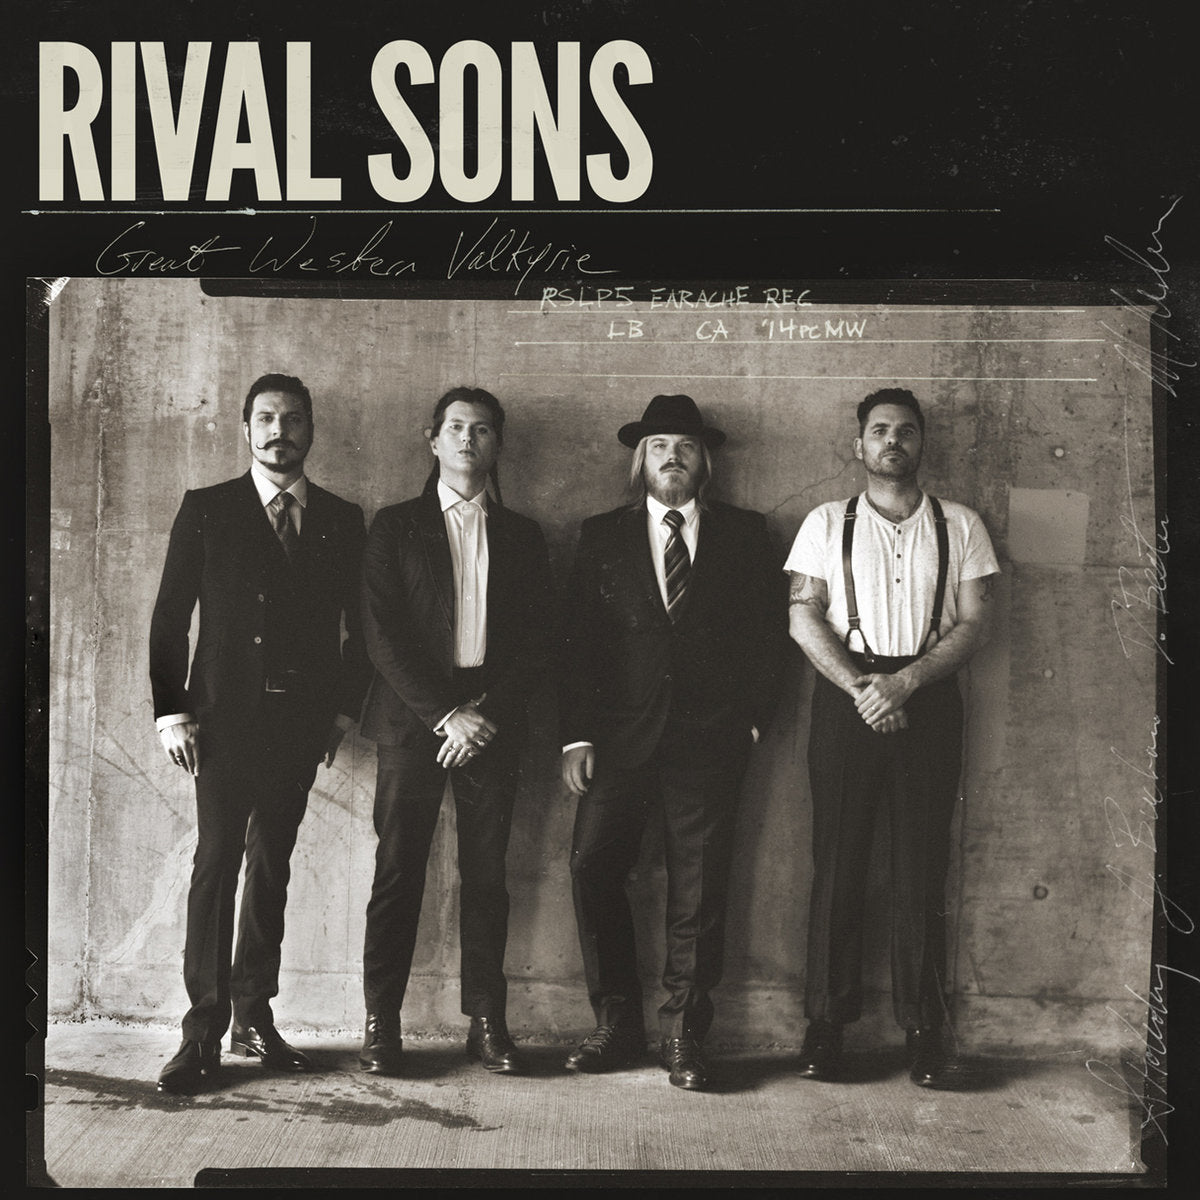 Rival Sons "Great Western Valkyrie" Digital Download